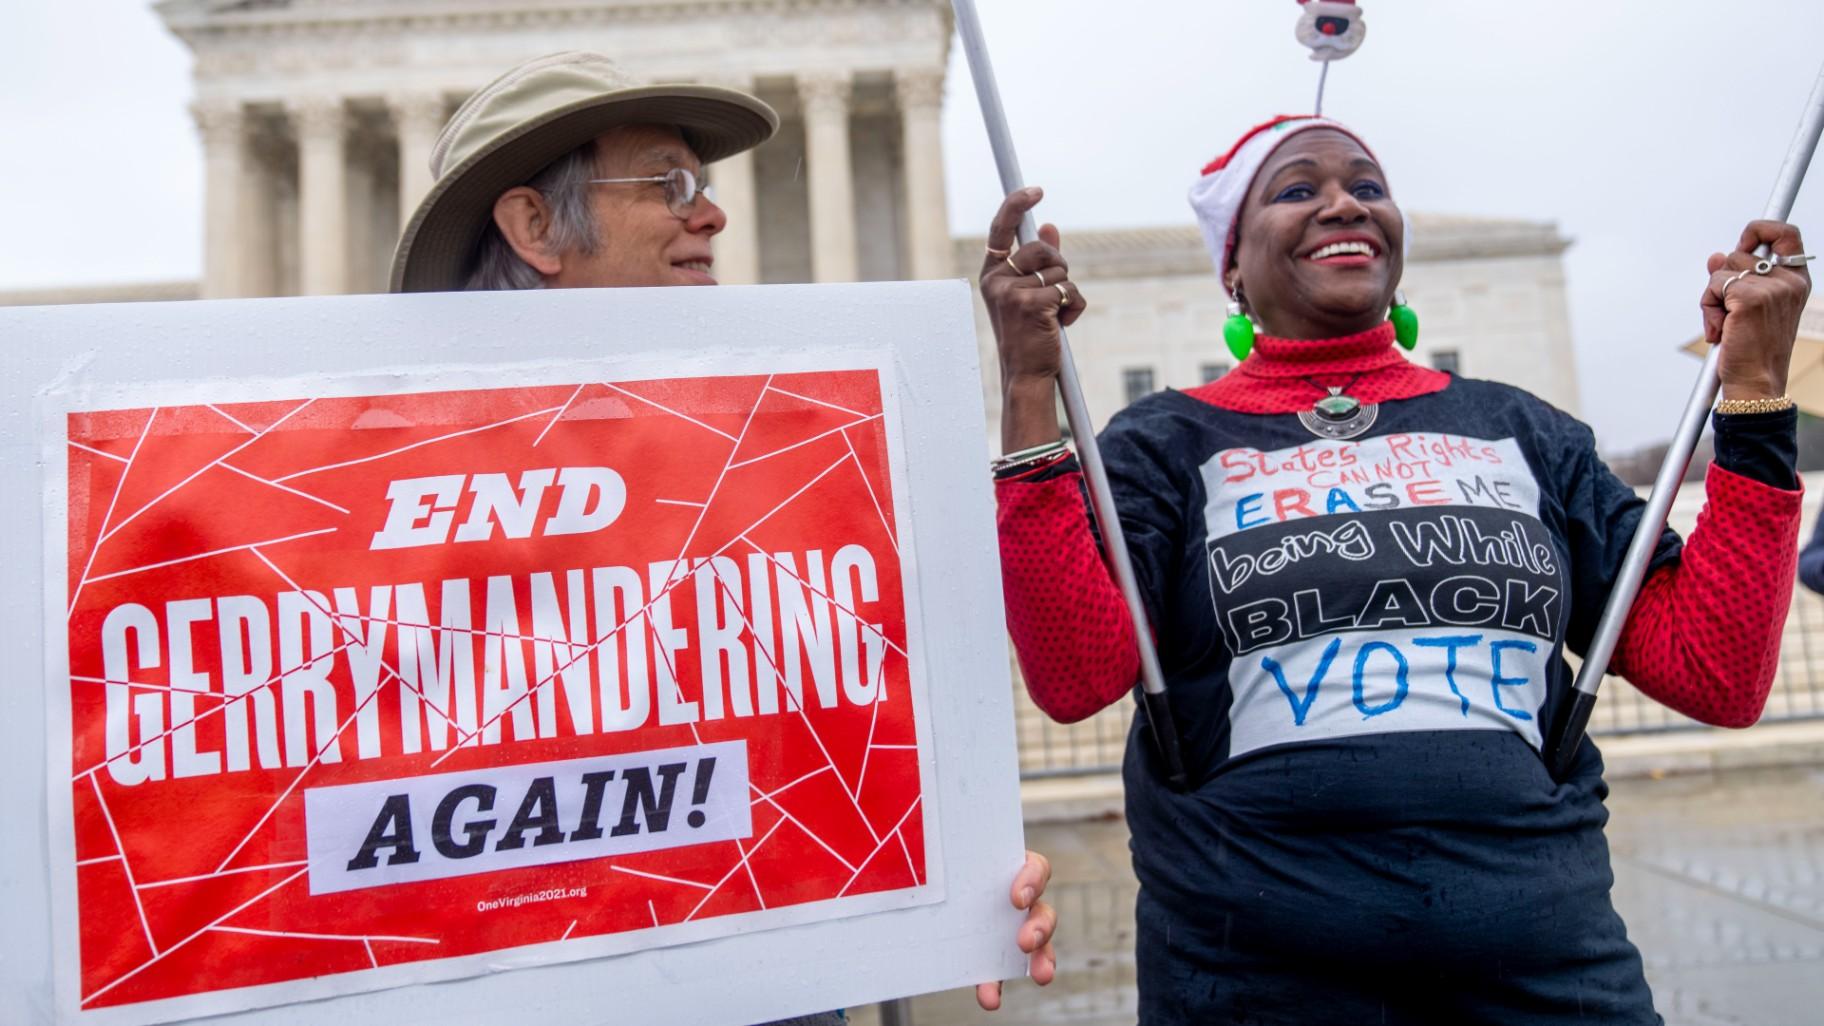 Michael Martin of Springfield, Va., with UpVote Virginia, holds a sign that reads “End Gerrymandering Again!” and speaks with Nadine Seiler of Waldorf, Md., in front of the Supreme Court in Washington, Wednesday, Dec. 7, 2022. (AP Photo / Andrew Harnik)